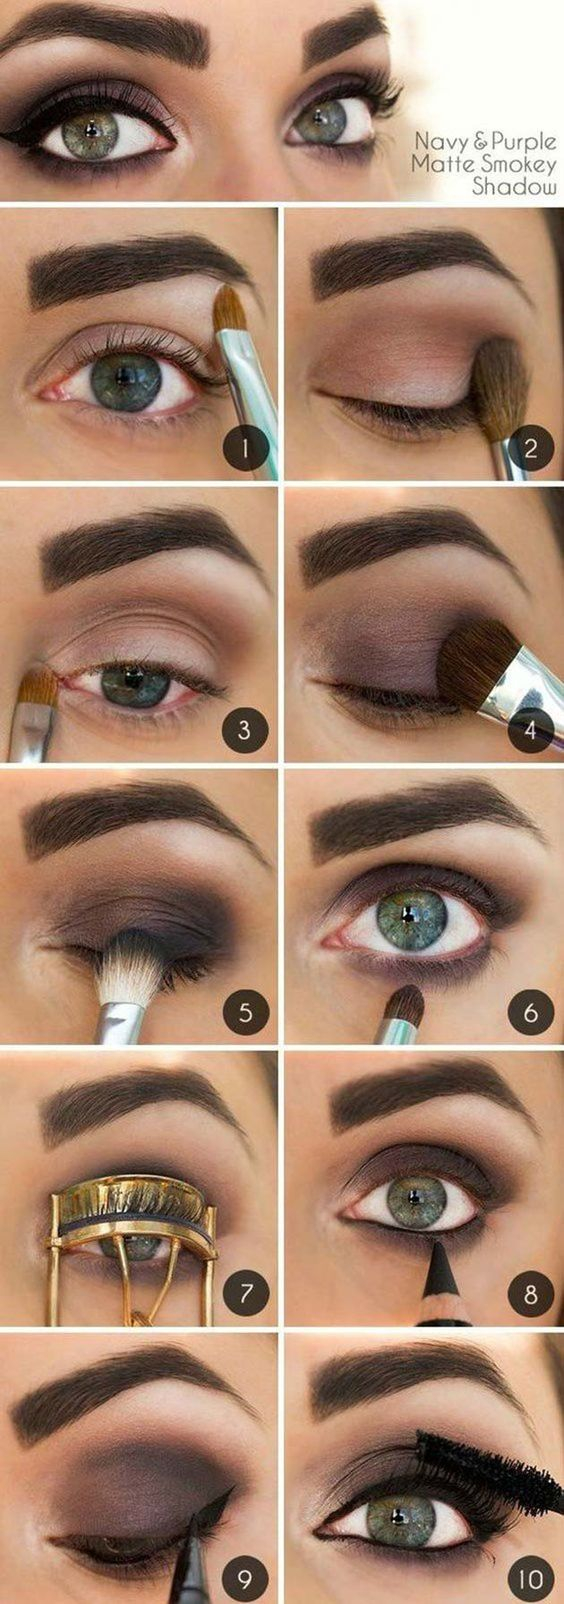 Makeup Ideas For Green Eyes 10 Step Step Makeup Tutorials For Green Eyes Her Style Code